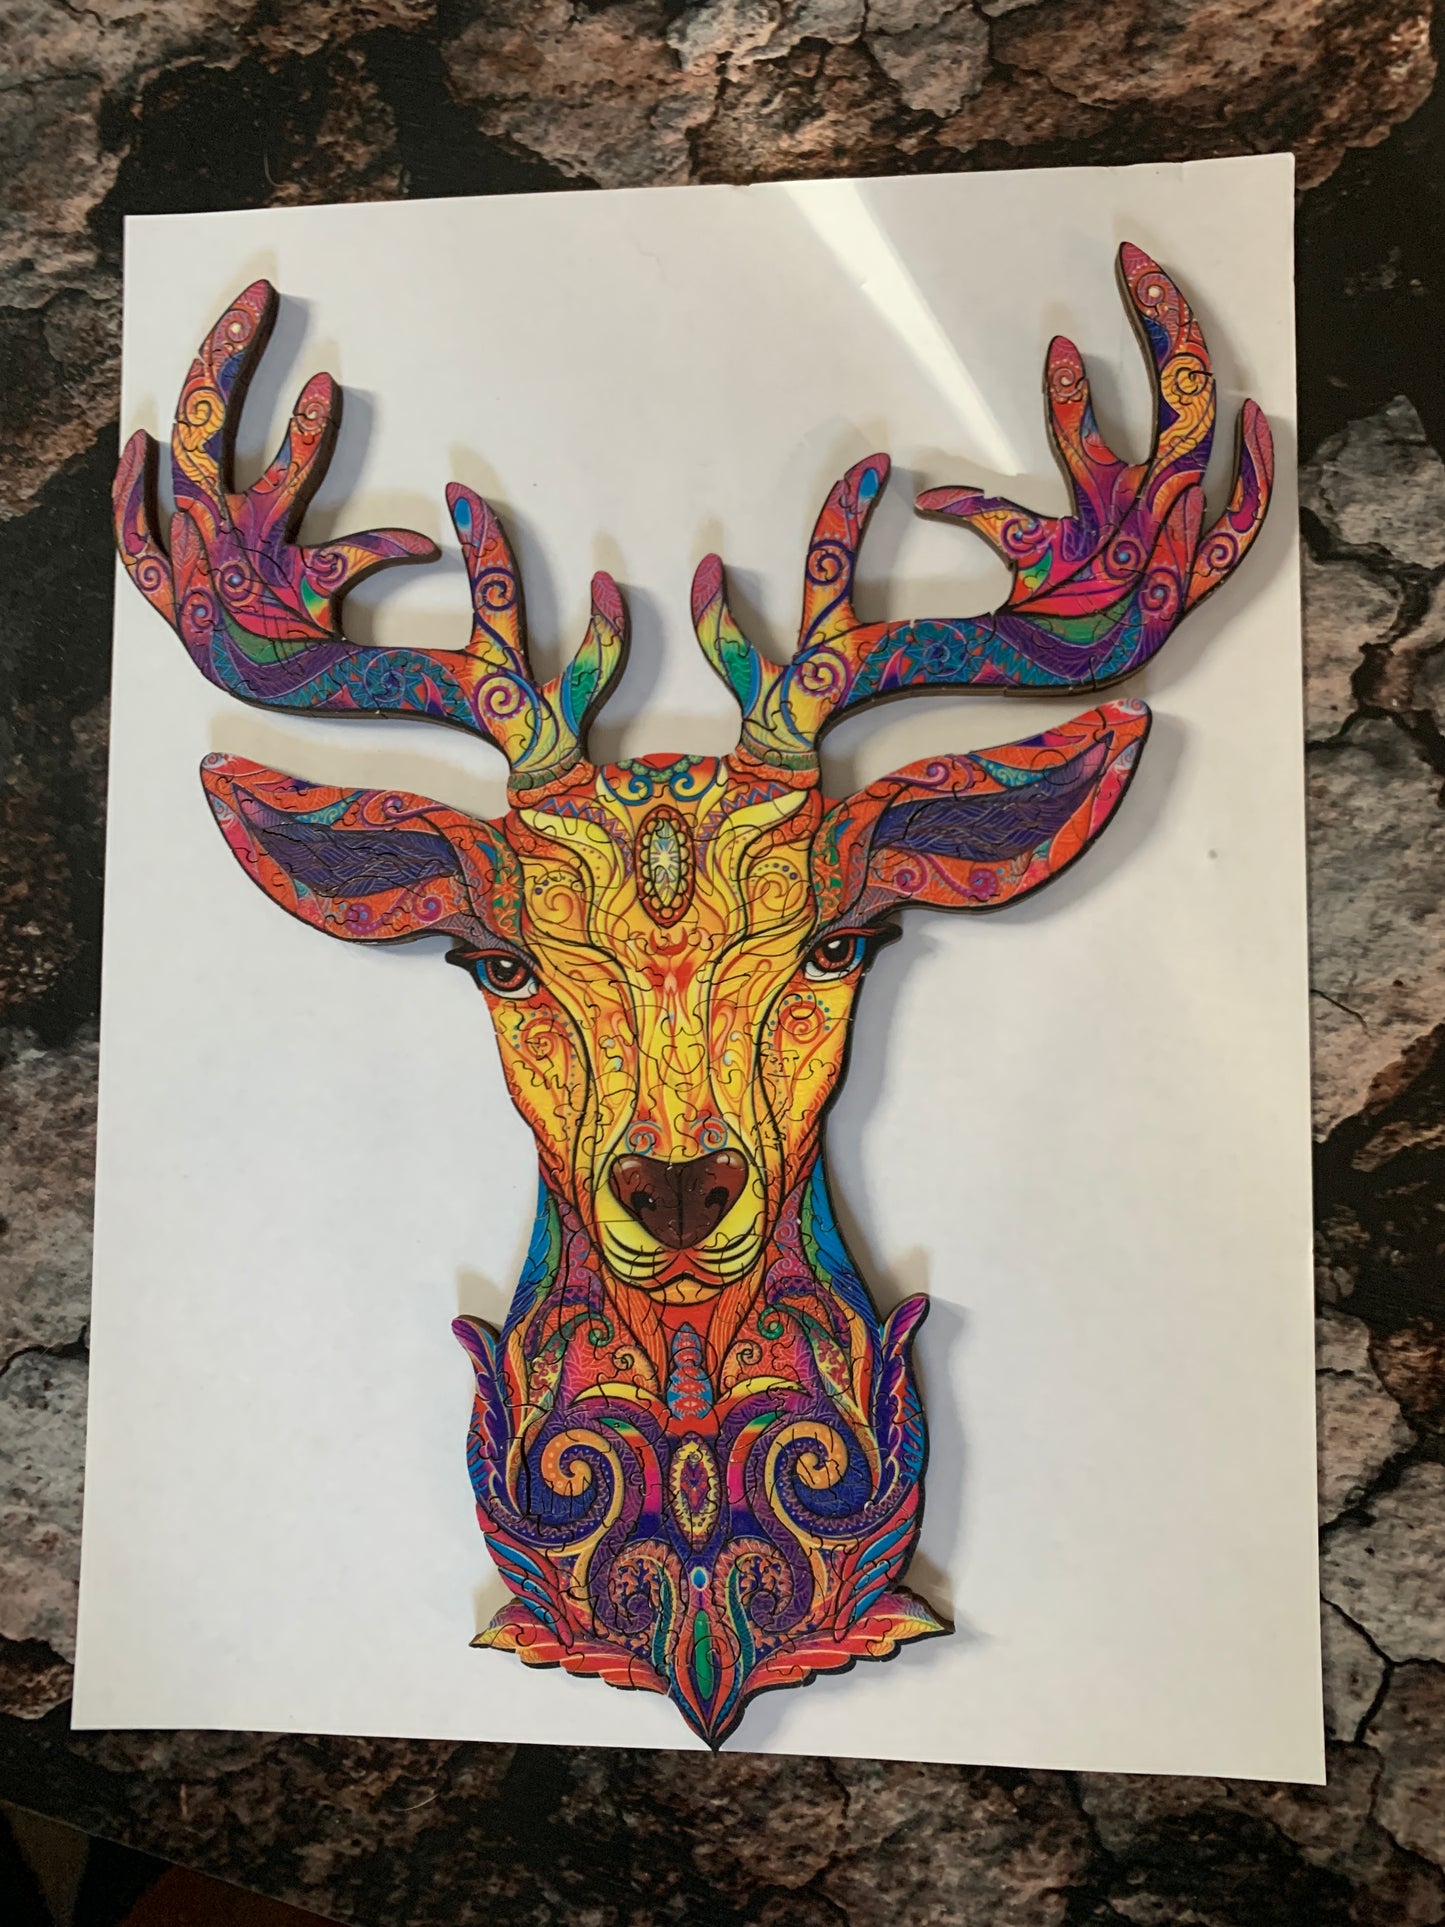 MAGICAL DEER PUZZLE - Intricate, Colorful, Unique Wooden Animal Puzzle - 2 sizes